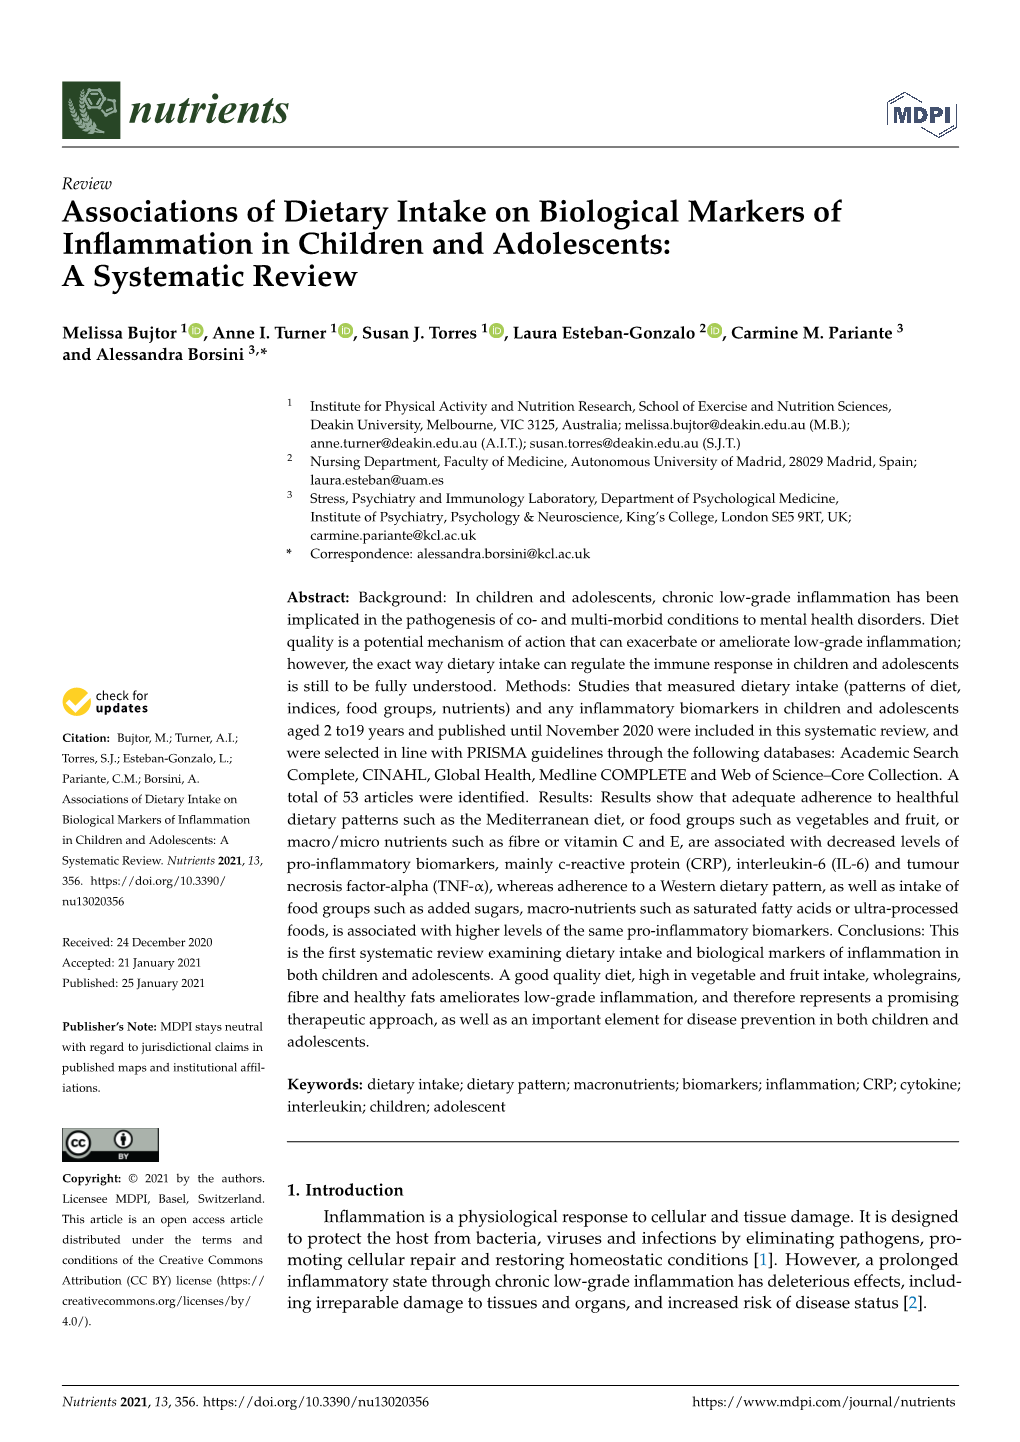 Associations of Dietary Intake on Biological Markers of Inflammation in Children and Adolescents: a Systematic Review